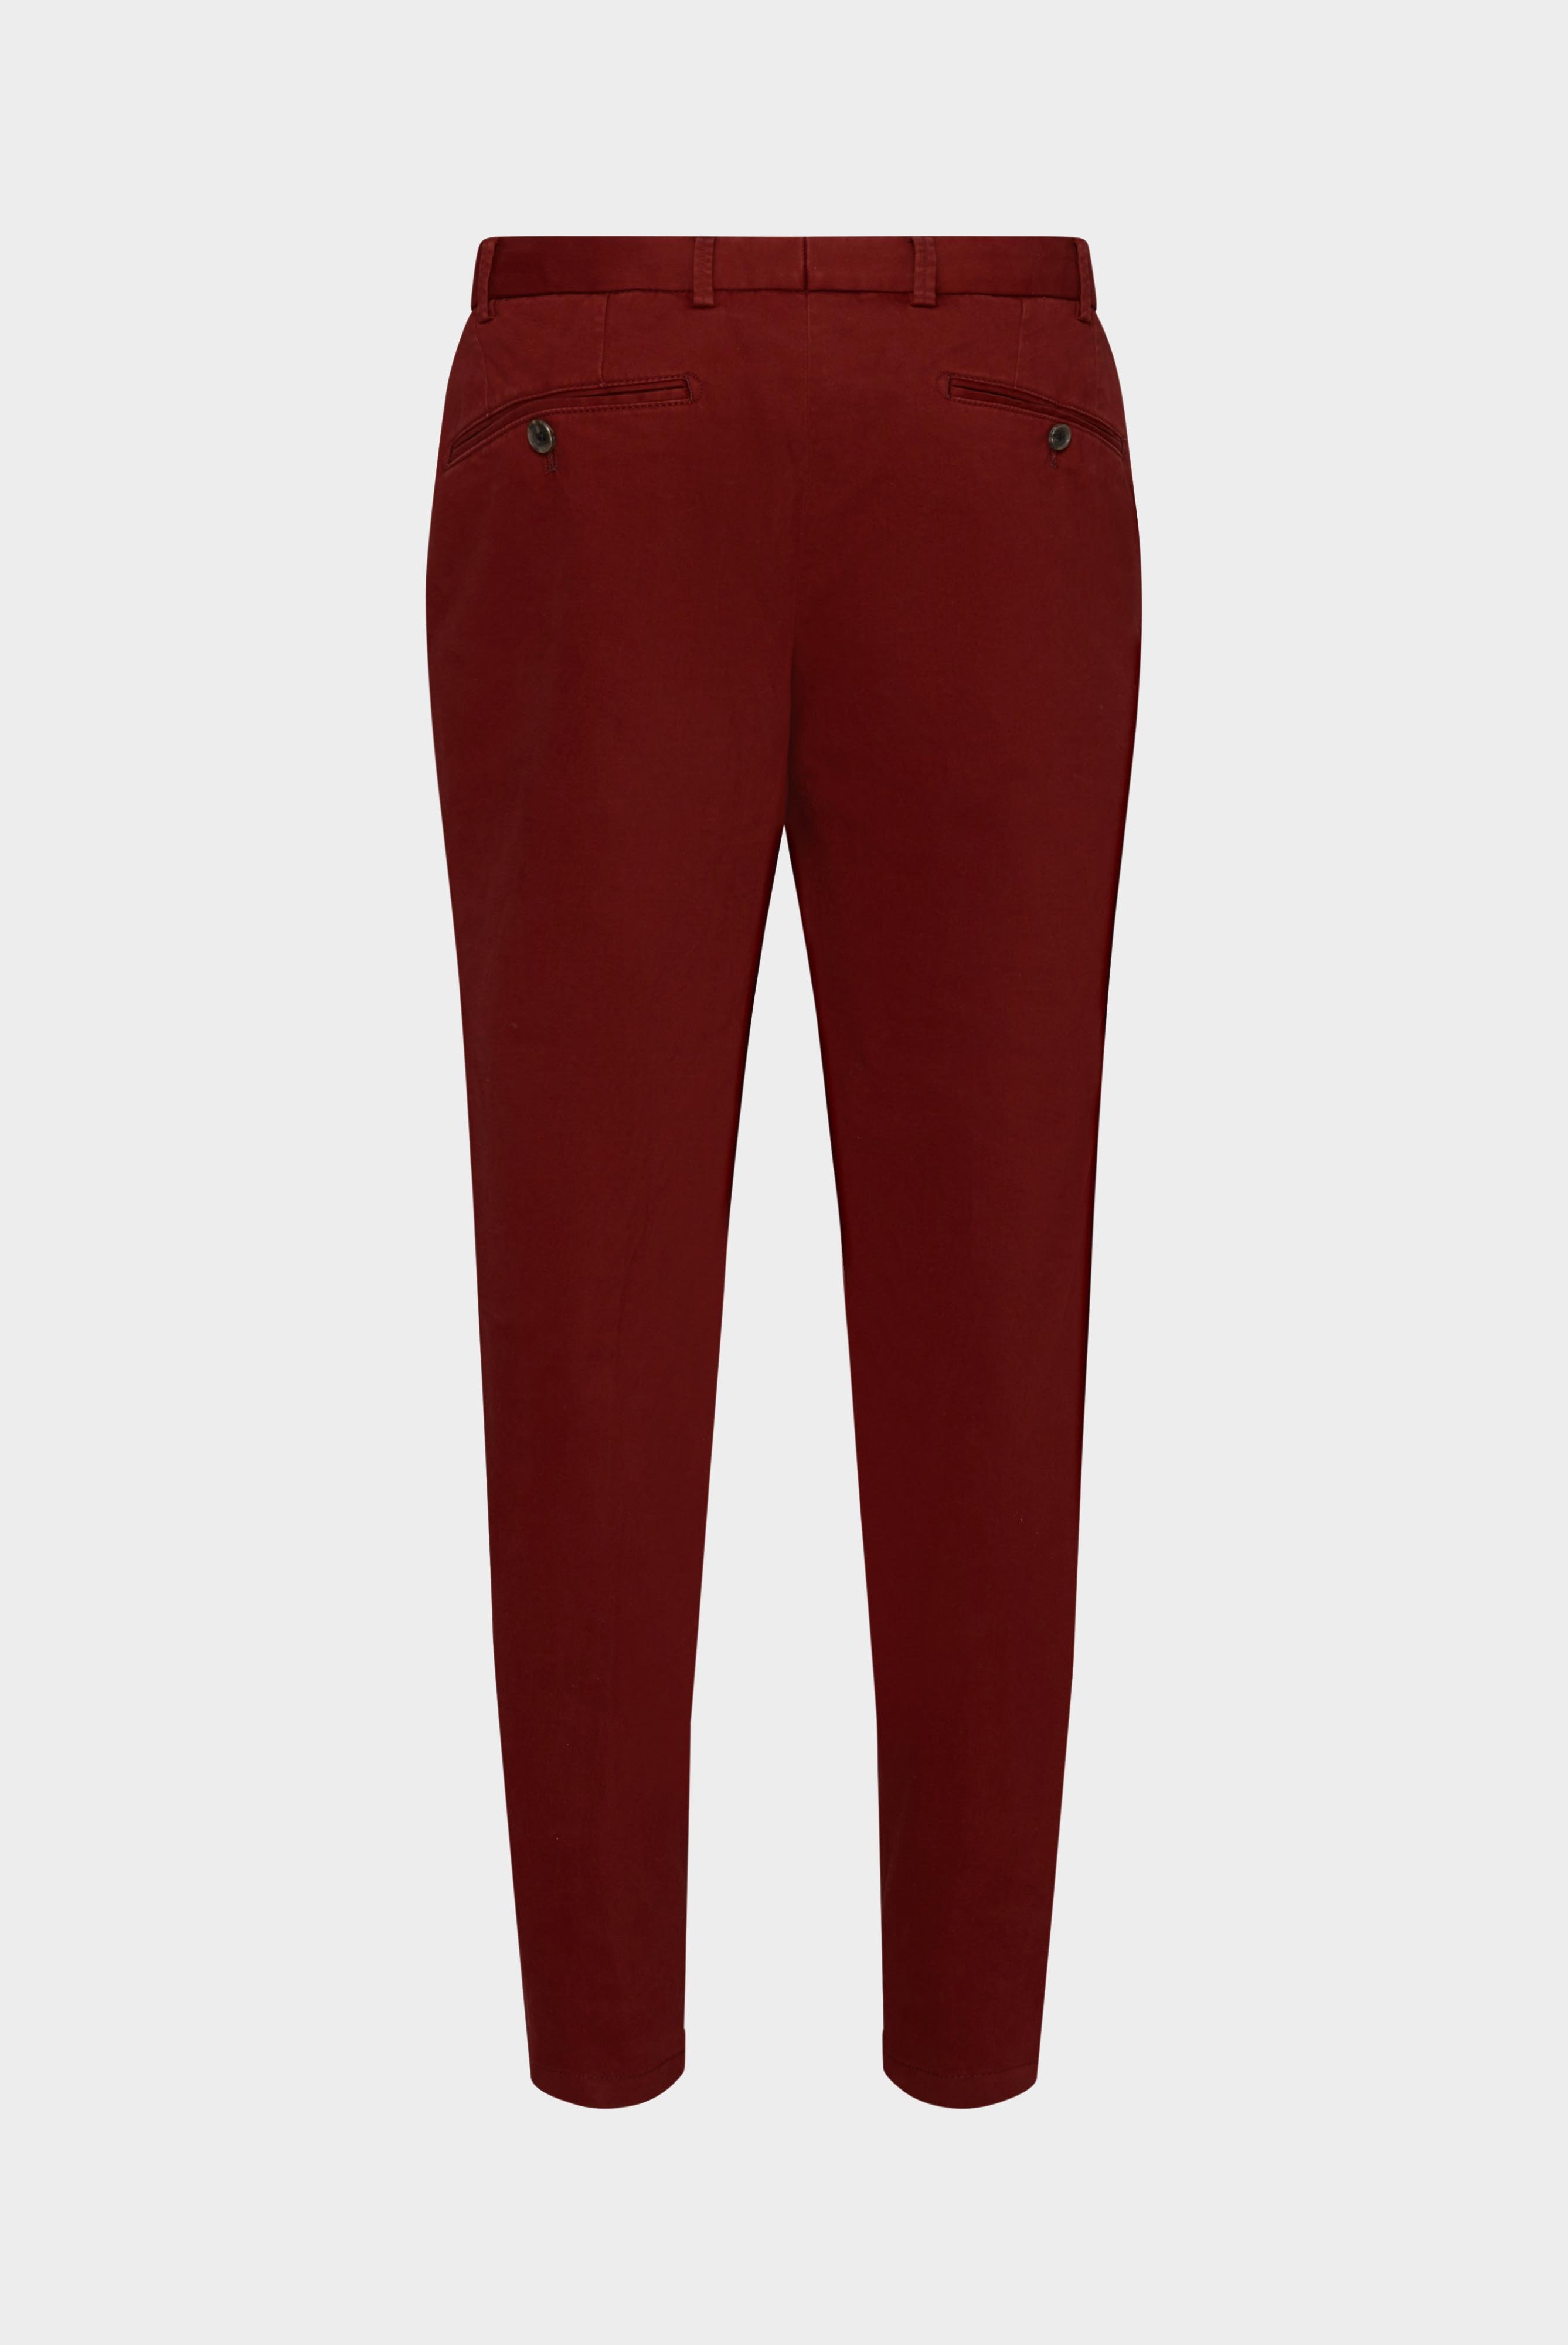 Jeans & Trousers+Chino Trousers with stretch Slim Fit+80.7881..J00118.580.46